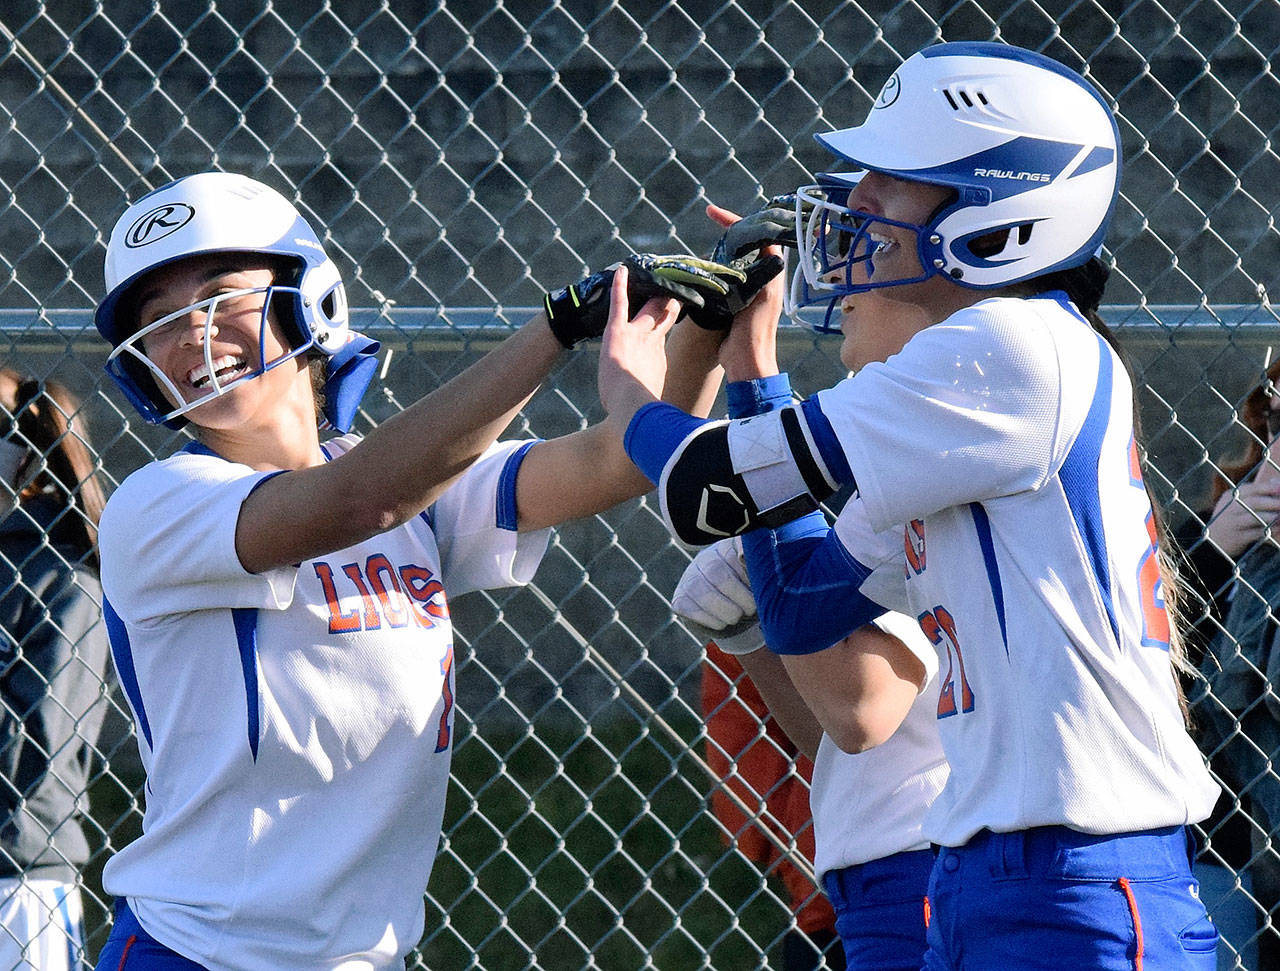 Auburn Mountainview’s Adriana Lomeli-Smith, right, celebrates her grand slam home run with Alashae Bell (1) and teammates during the Lions’ 23-22 North Puget Sound League Olympic Division softball win over Decatur on Tuesday. RACHEL CIAMPI, Auburn Reporter